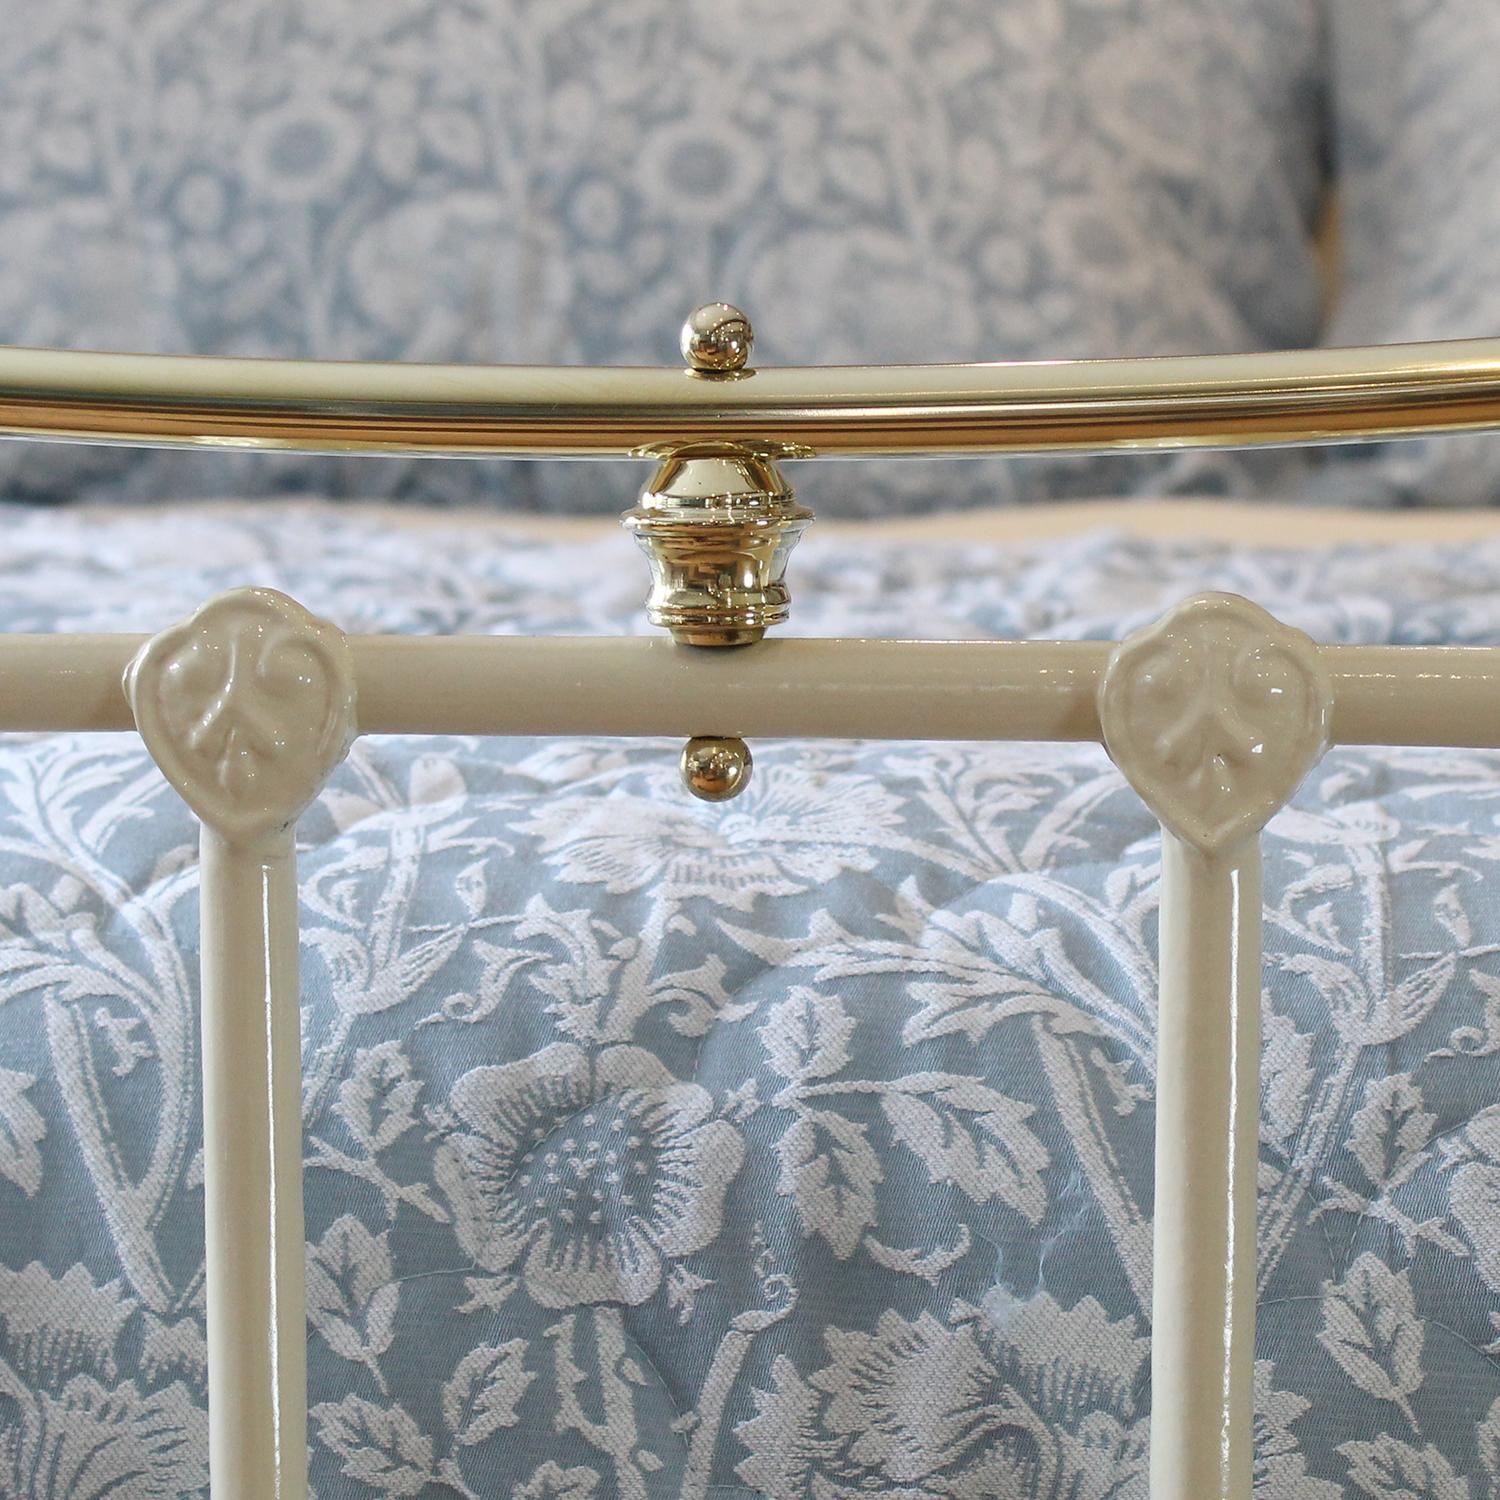 Cast Brass and Iron Antique Bed in Cream, MK260